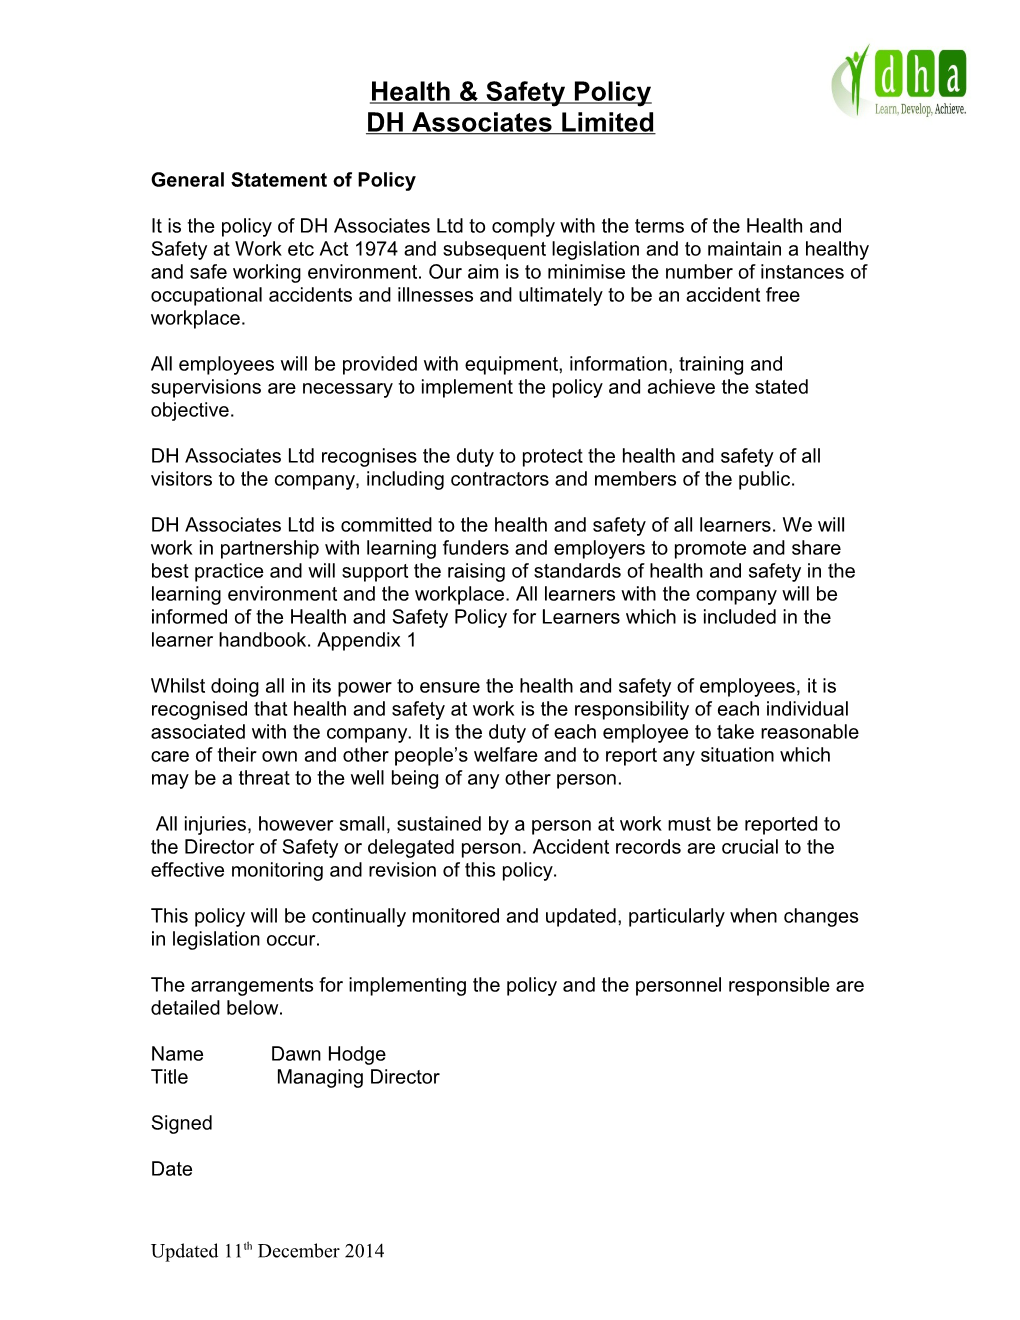 Health & Safety Policy s3